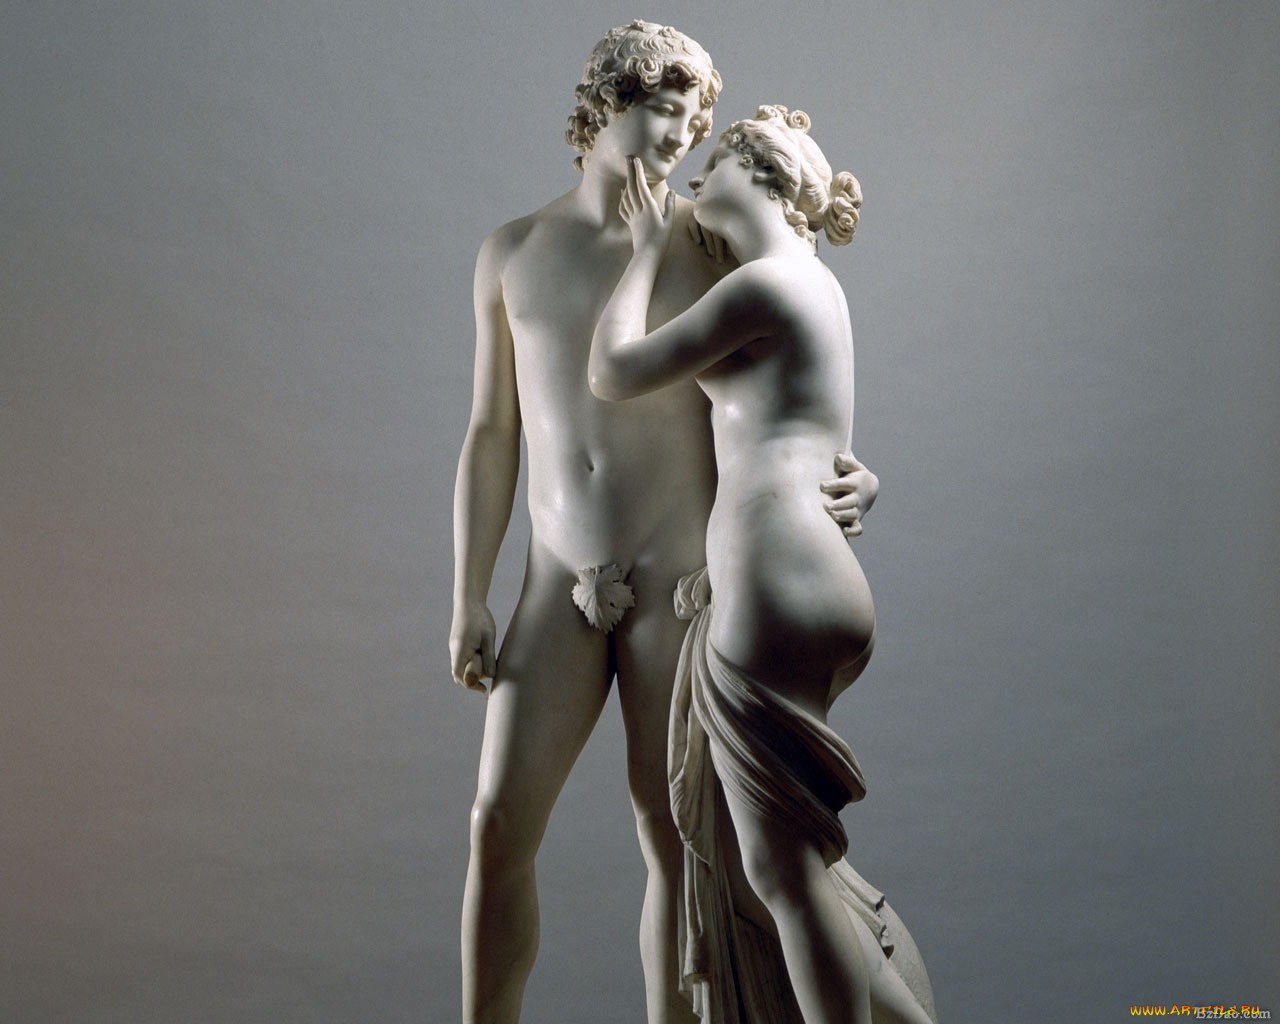 Ten things you might not know about auguste rodin